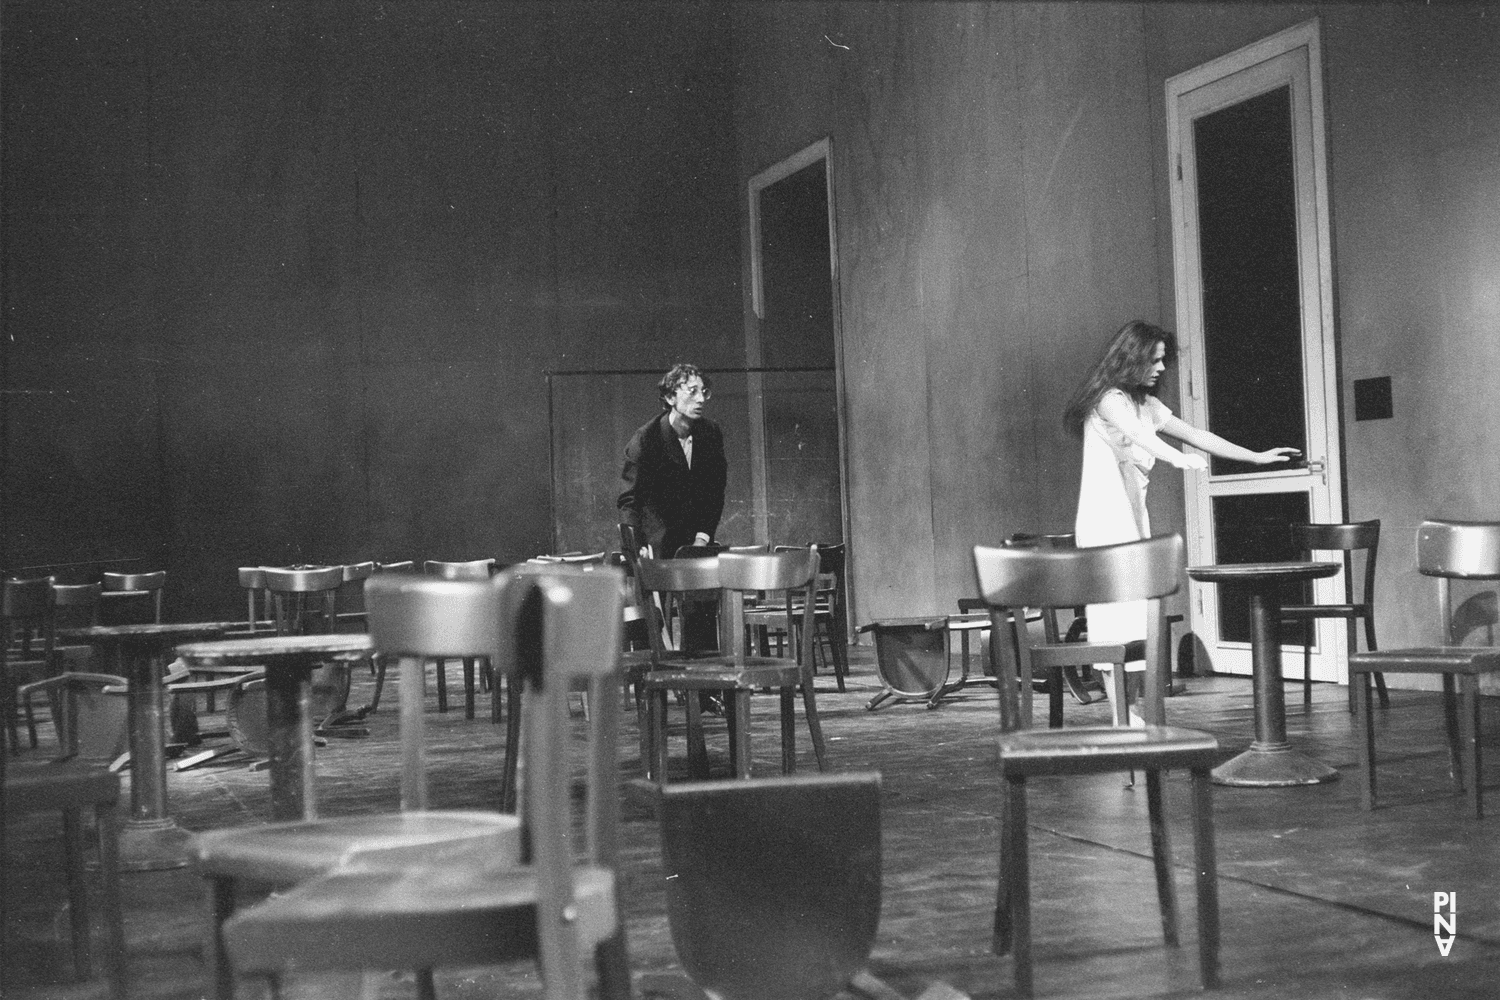 Malou Airaudo and Jean Laurent Sasportes in “Café Müller” by Pina Bausch